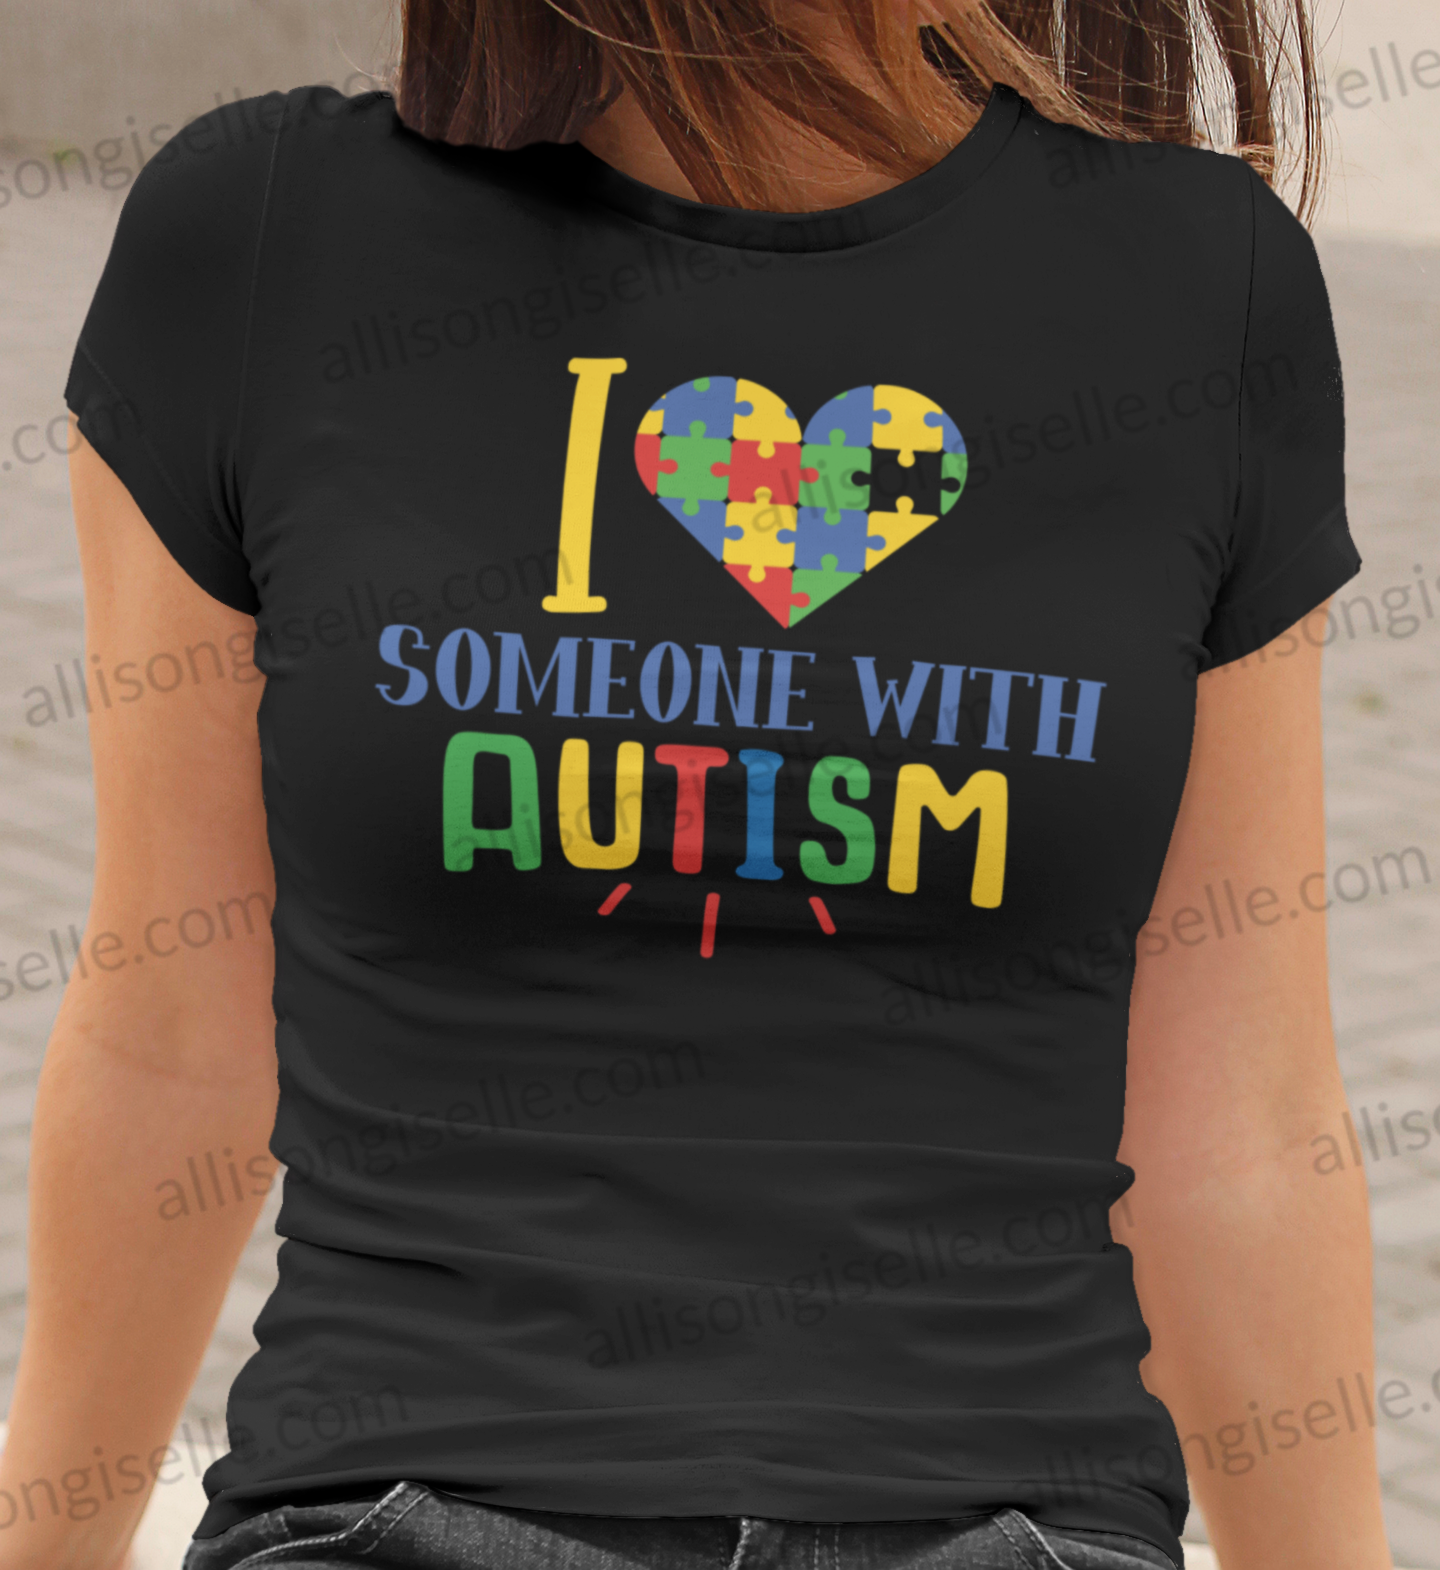 I Love Someone With Autism Shirt, Adult Autism Awareness shirts, Autism Shirt Adult, Adult Autism Shirt, Autism Awareness Shirt Adult